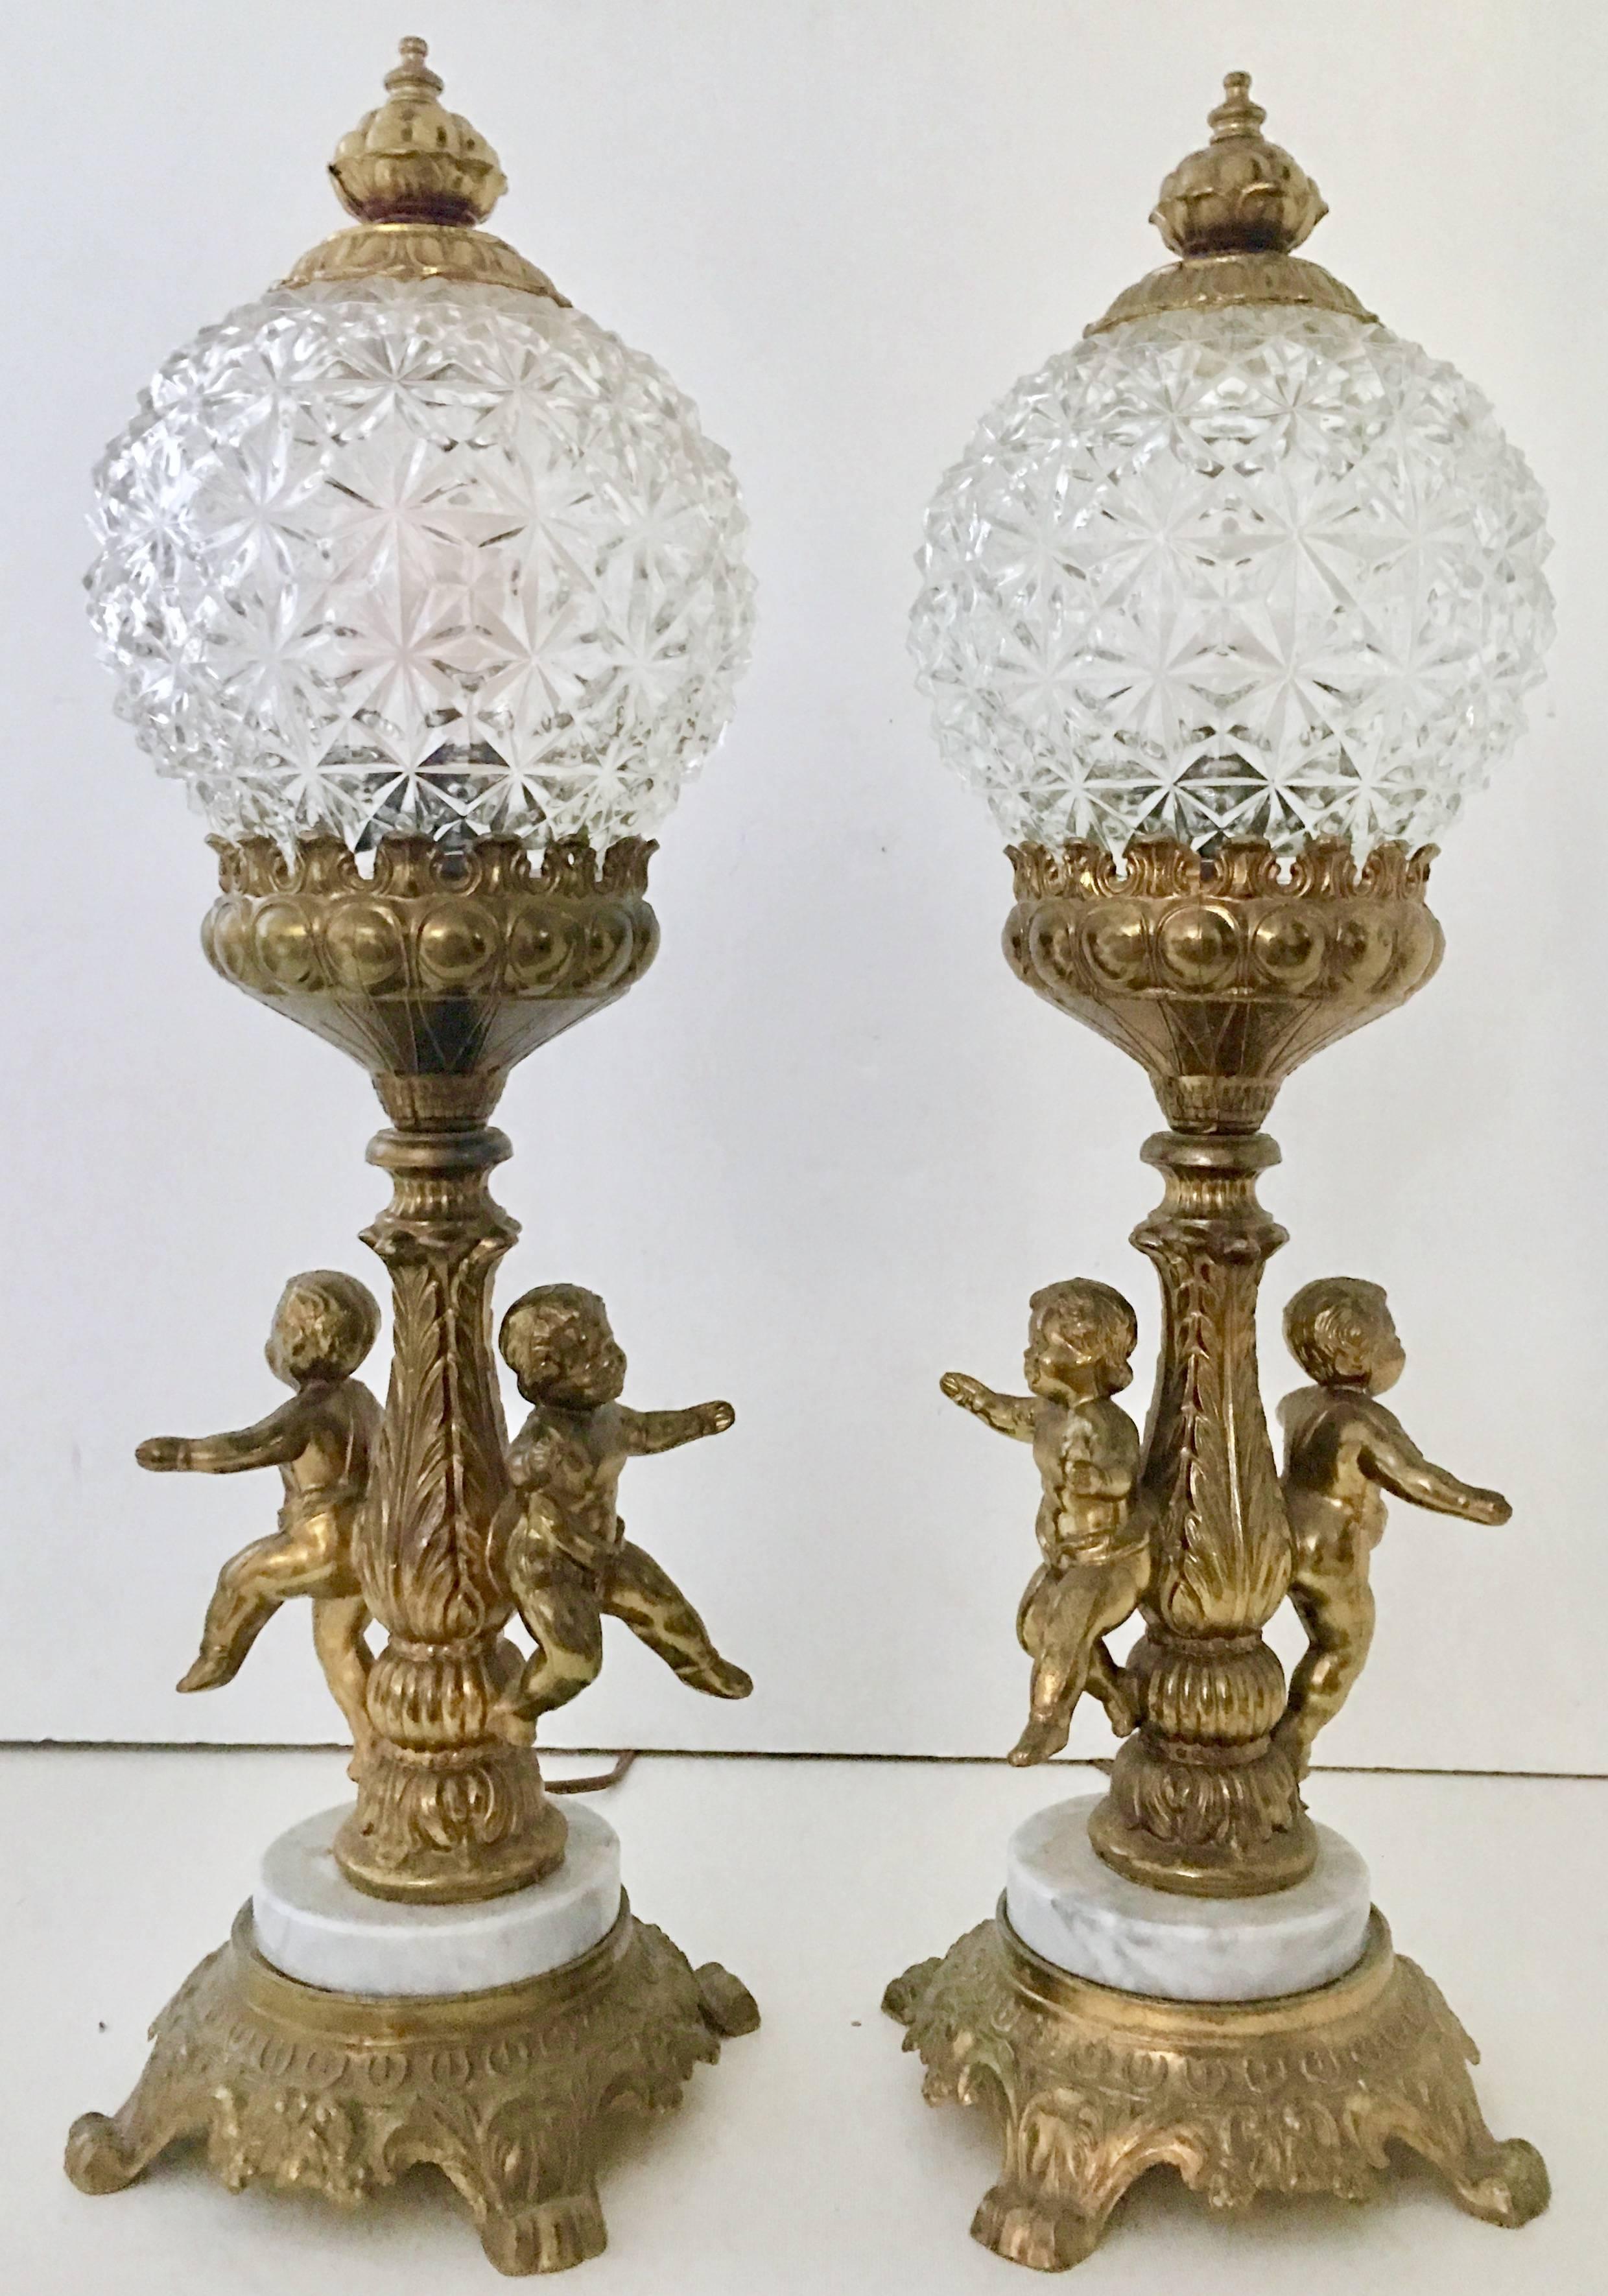 Antique pair of French style bronze ormolu and marble mounted putti electrified oil lamps. These fantastic double putti or cherub converted oil lamps feature a cut glass diamond pattern round globe with brass finial shade. Both cut-glass shades are